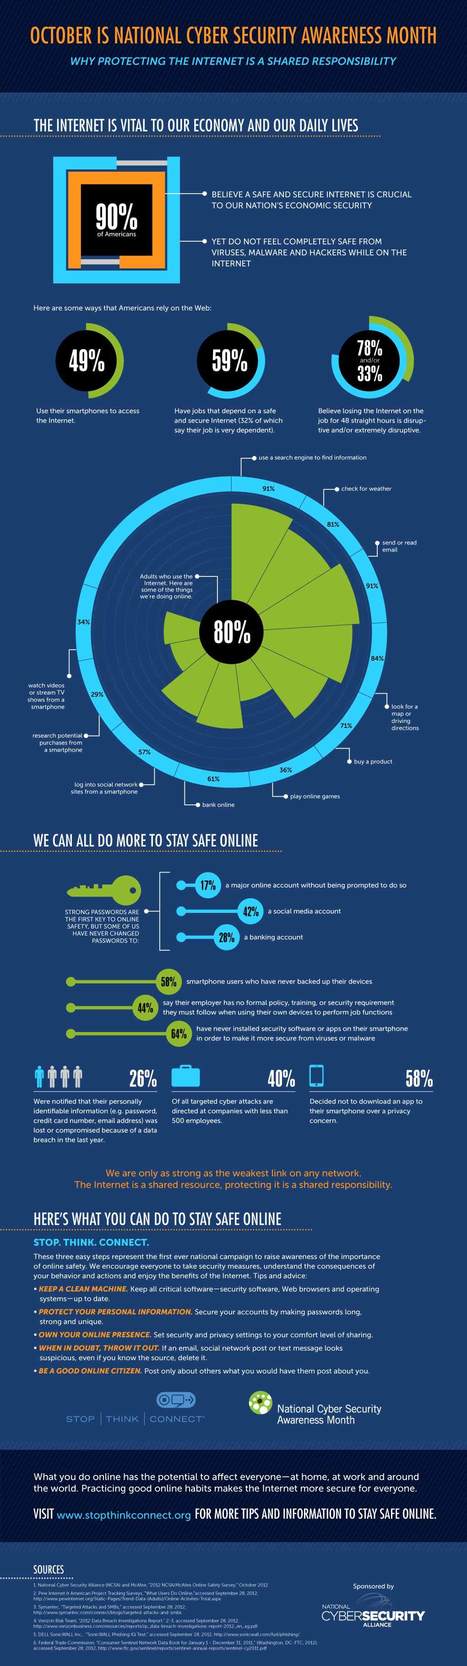 Protecting the Internet Infographic | StaySafeOnline.org | A New Society, a new education! | Scoop.it